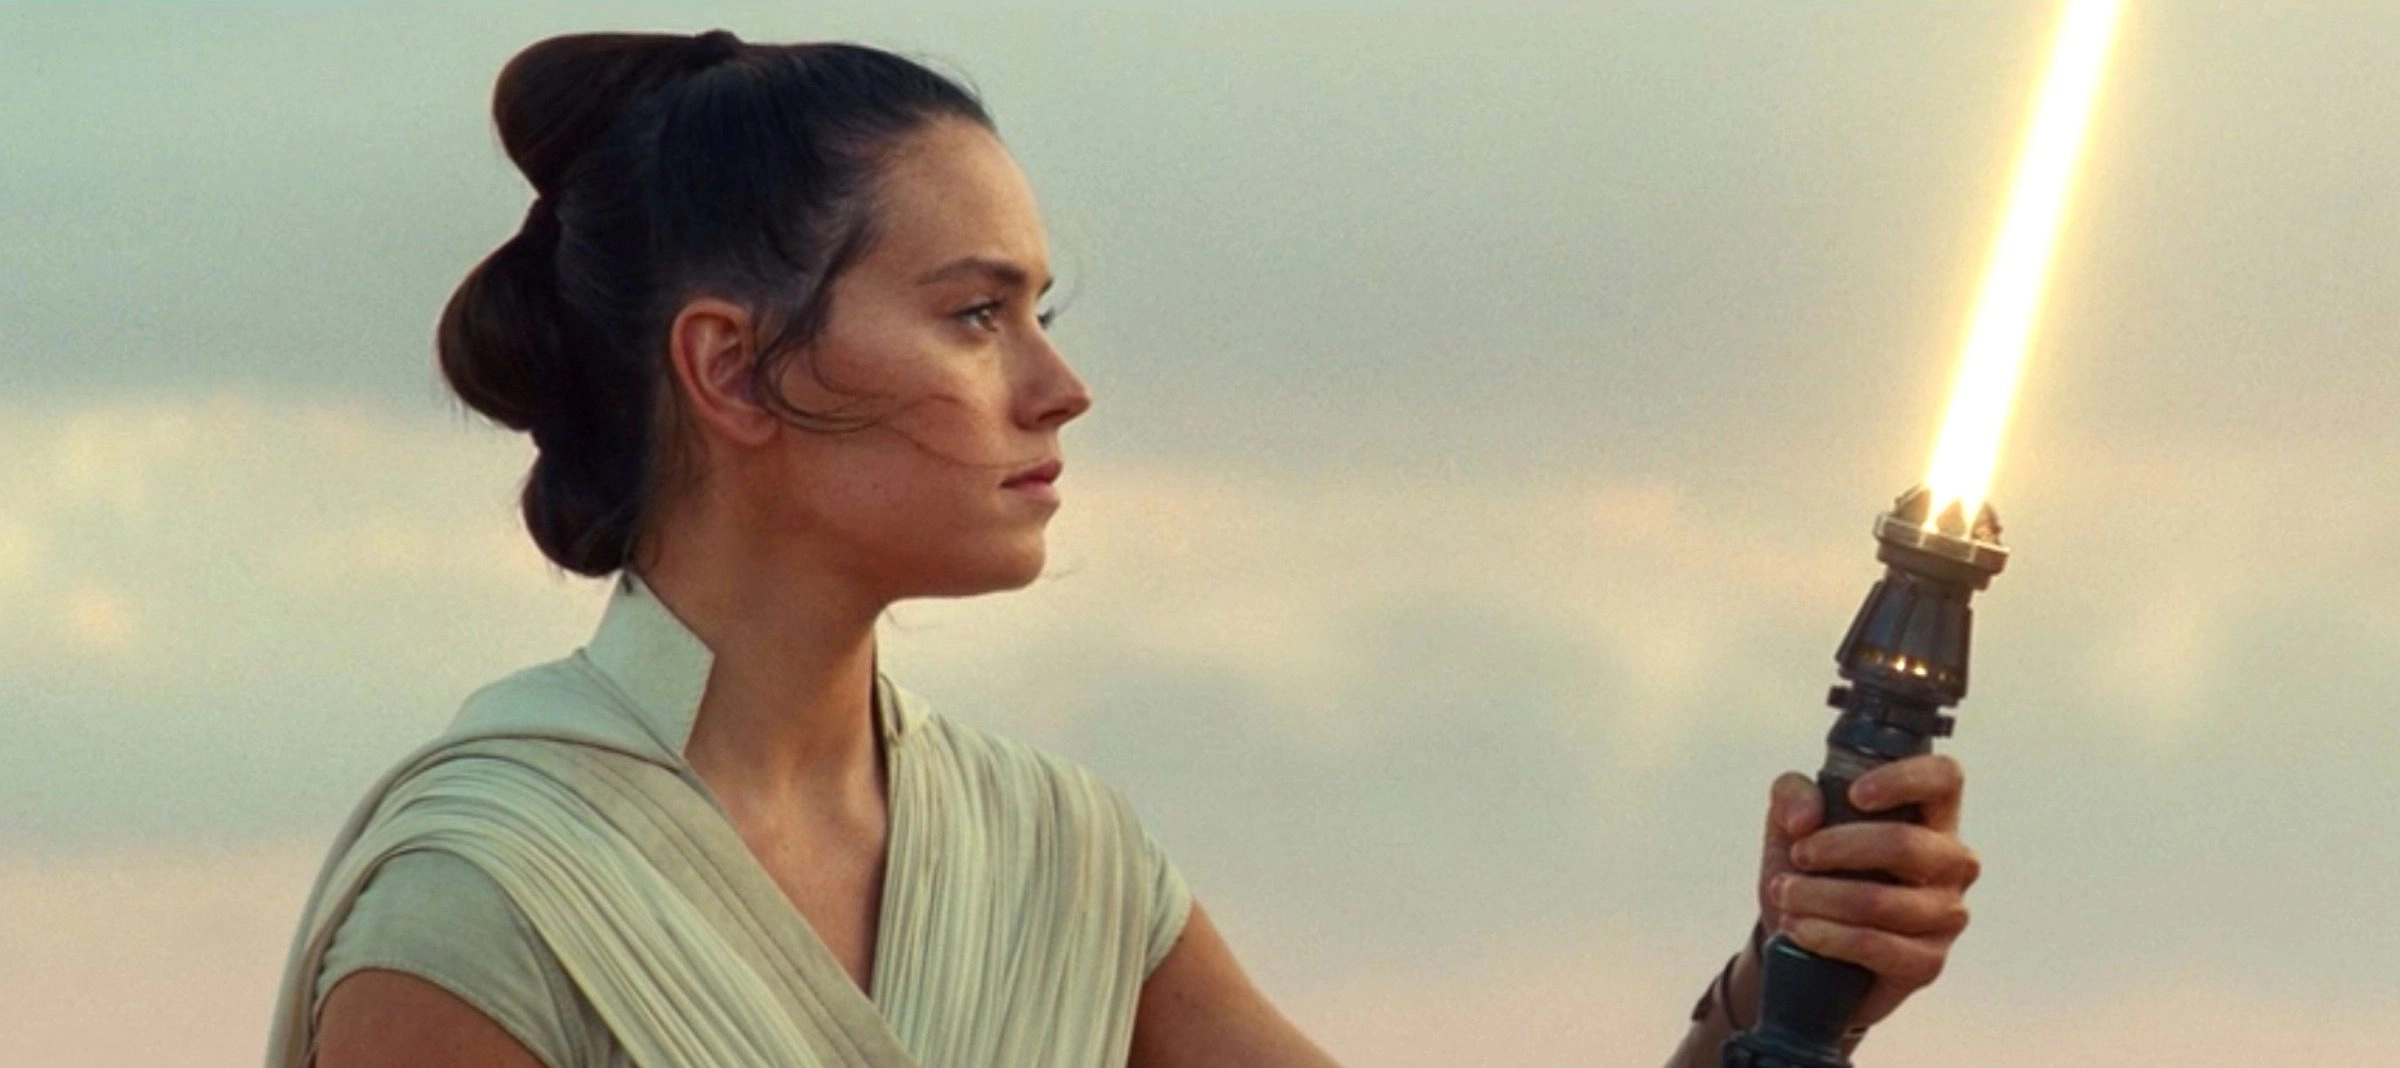 What is the Hidden Meaning Behind Rey's Lightsaber?